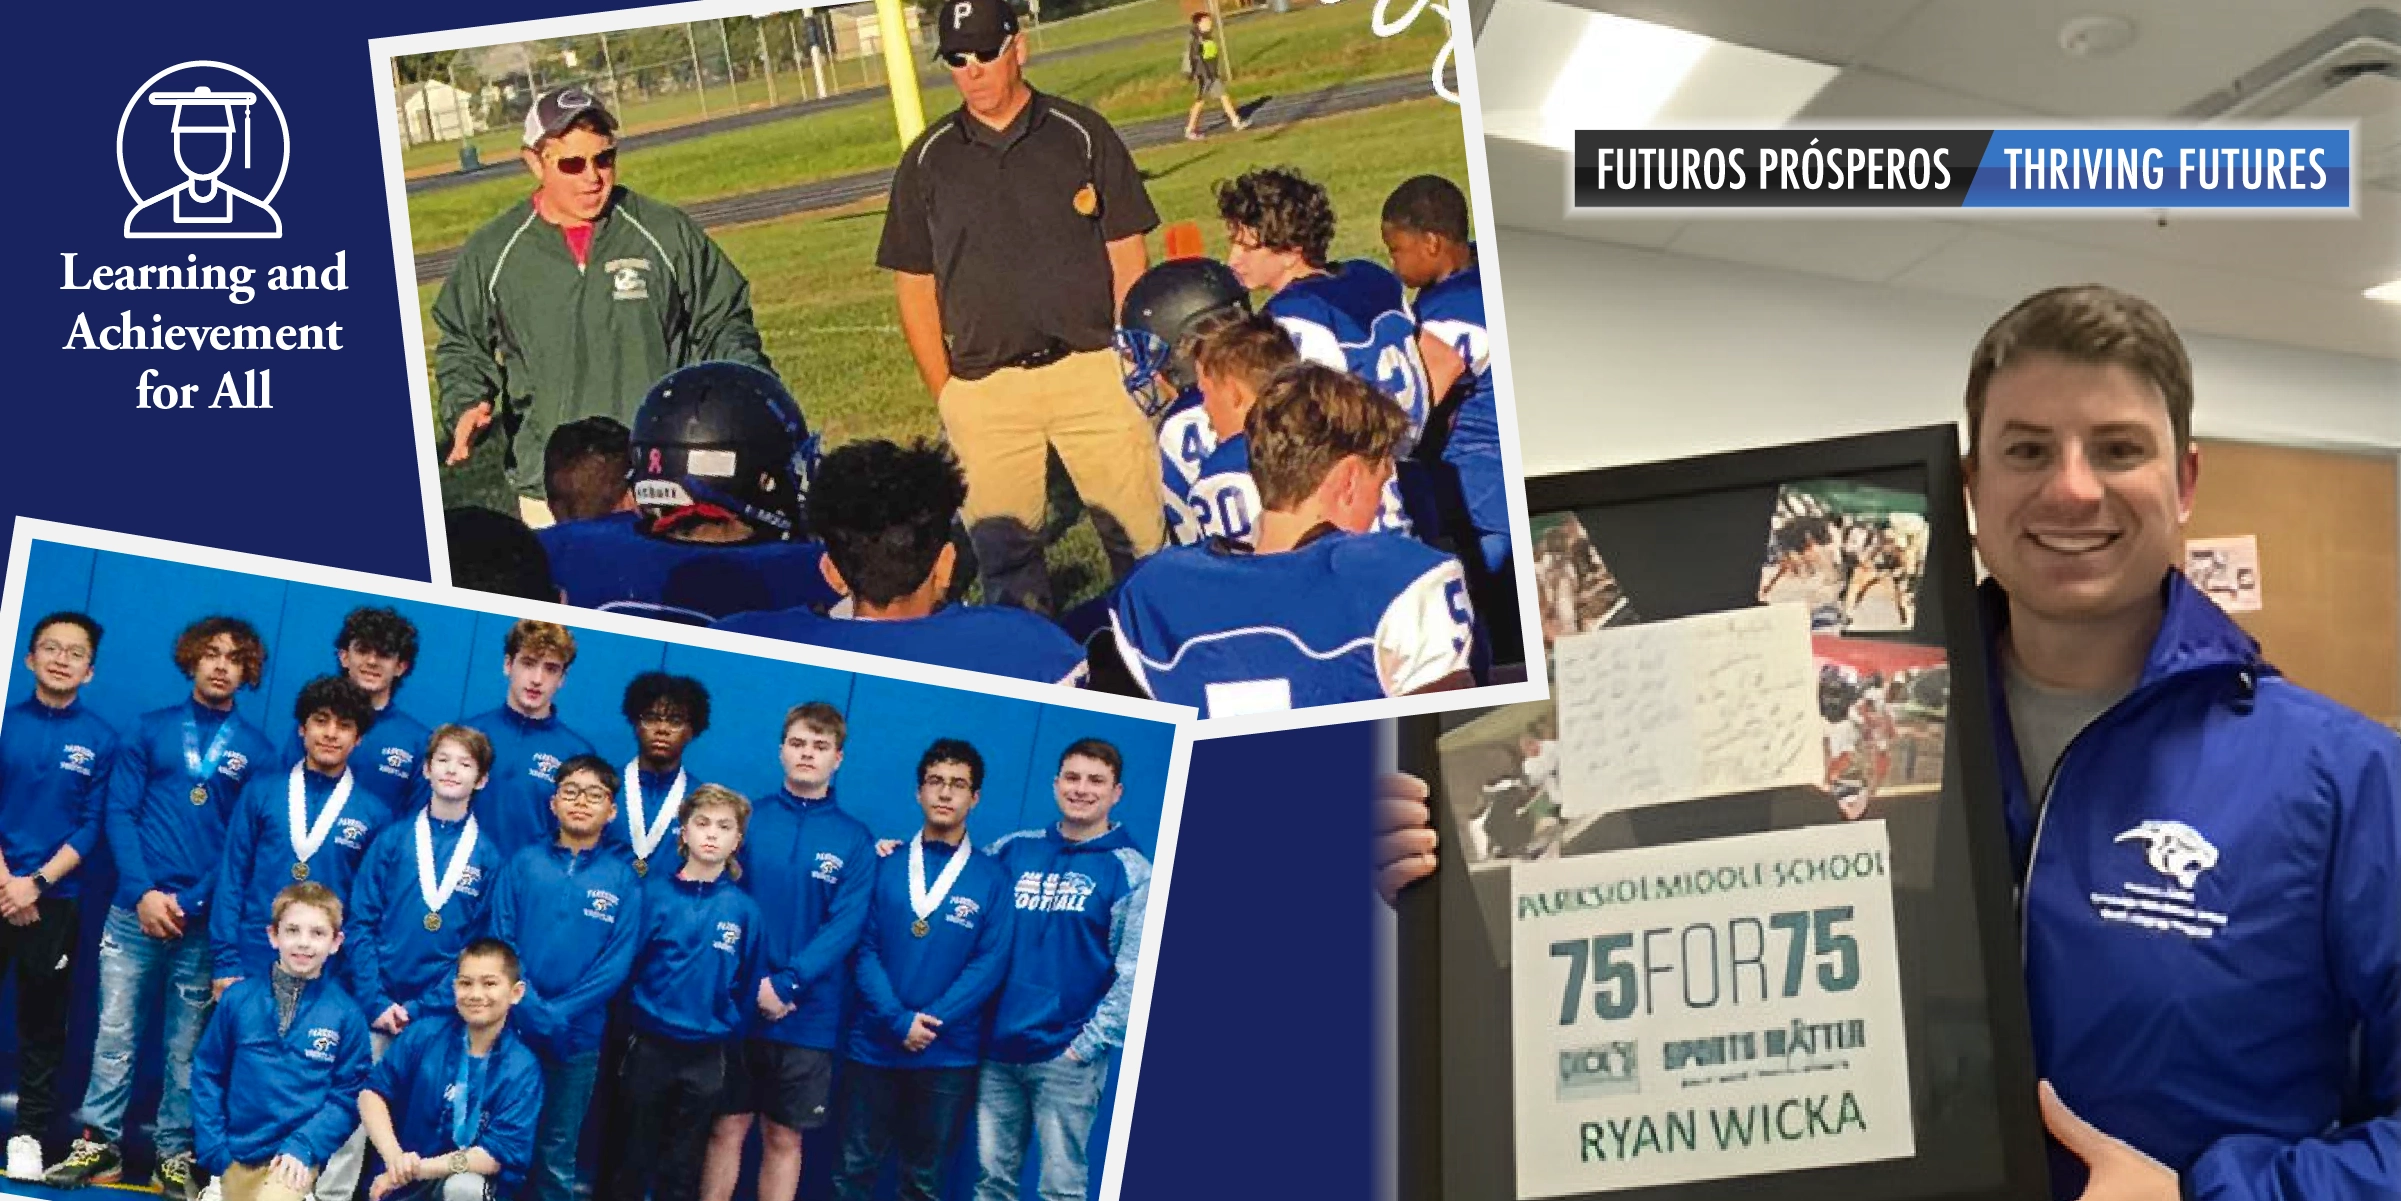 Photo of Ryan Wicka with the grant, as well as photos of the teams Wicka coaches